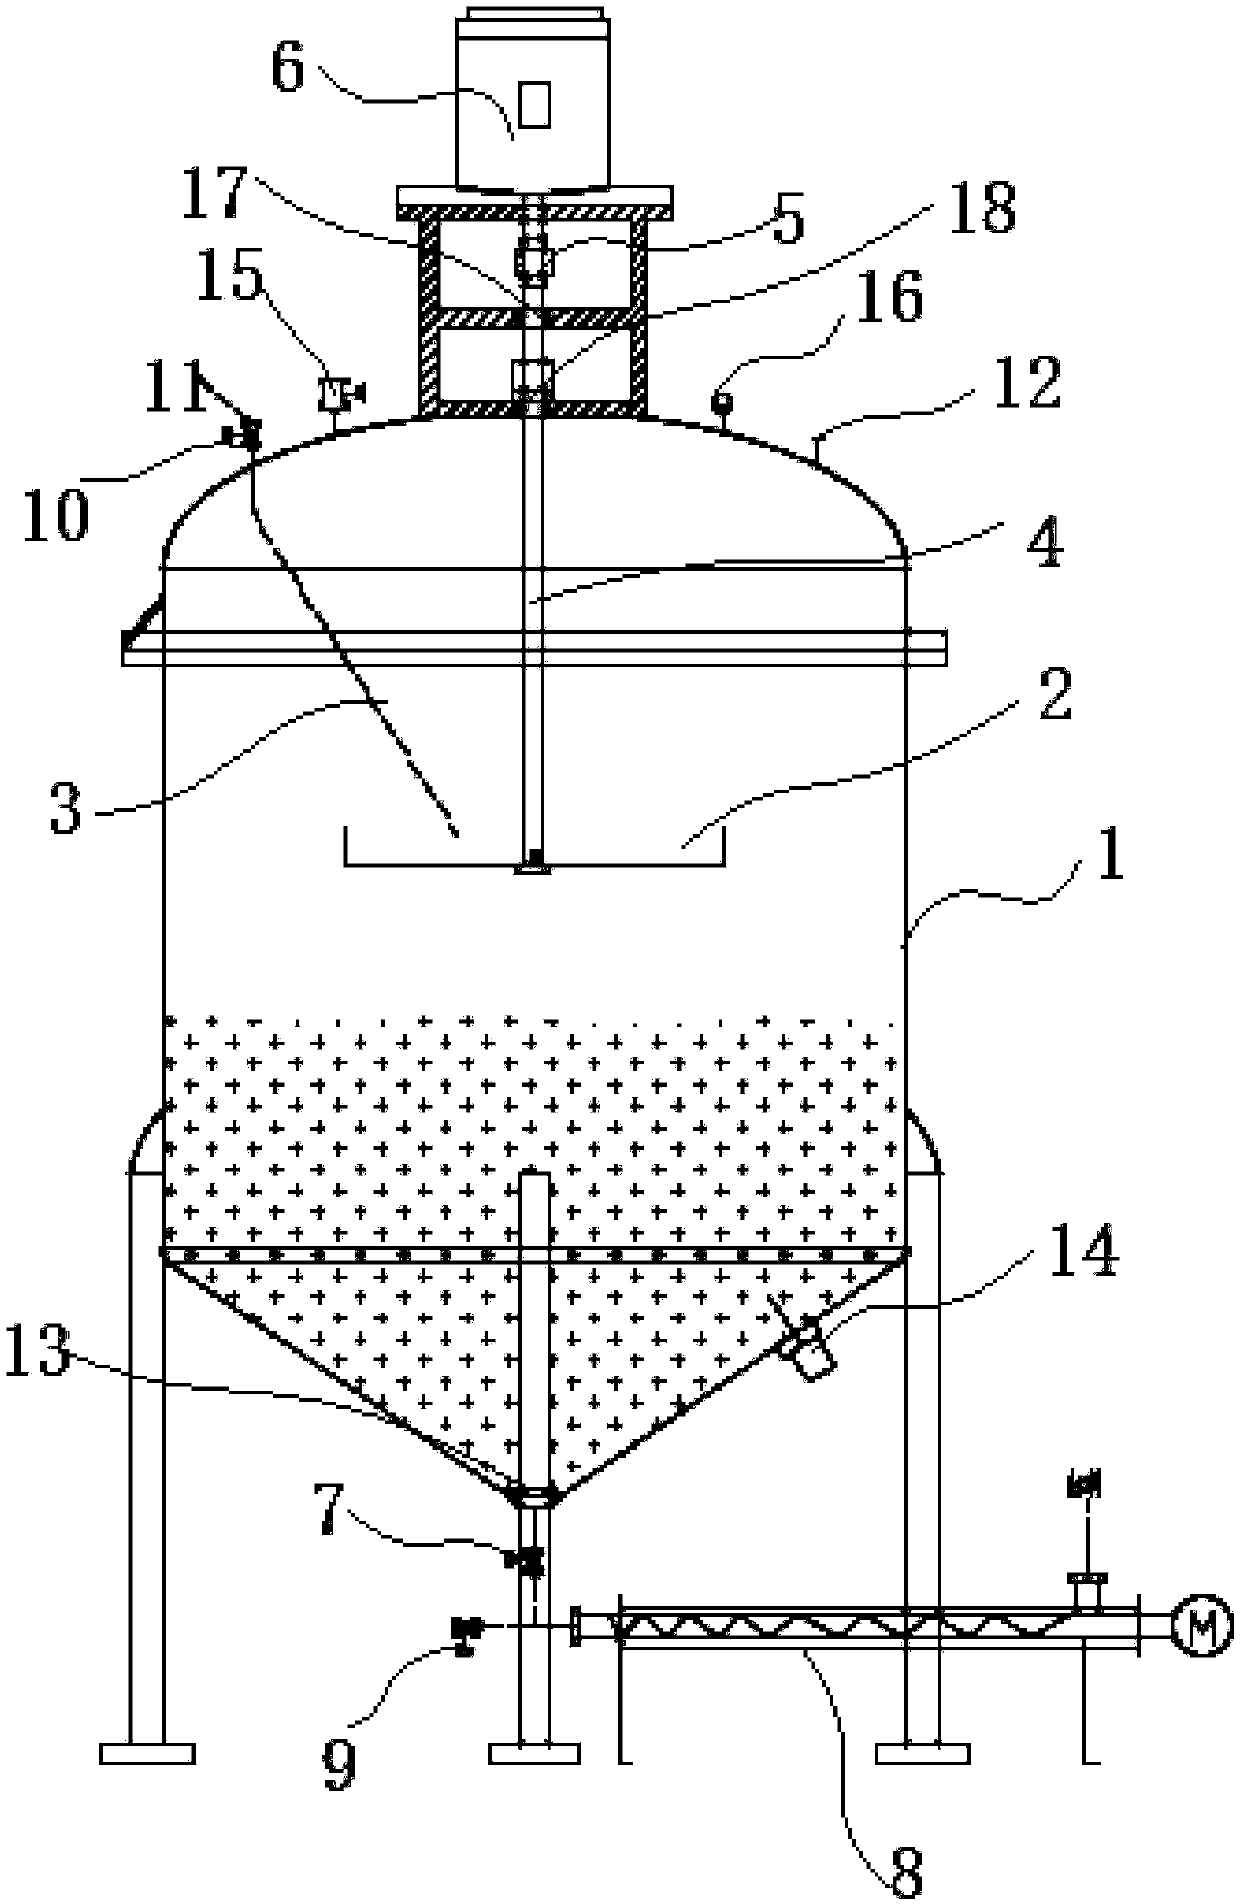 An on-line vacuum deaeration device